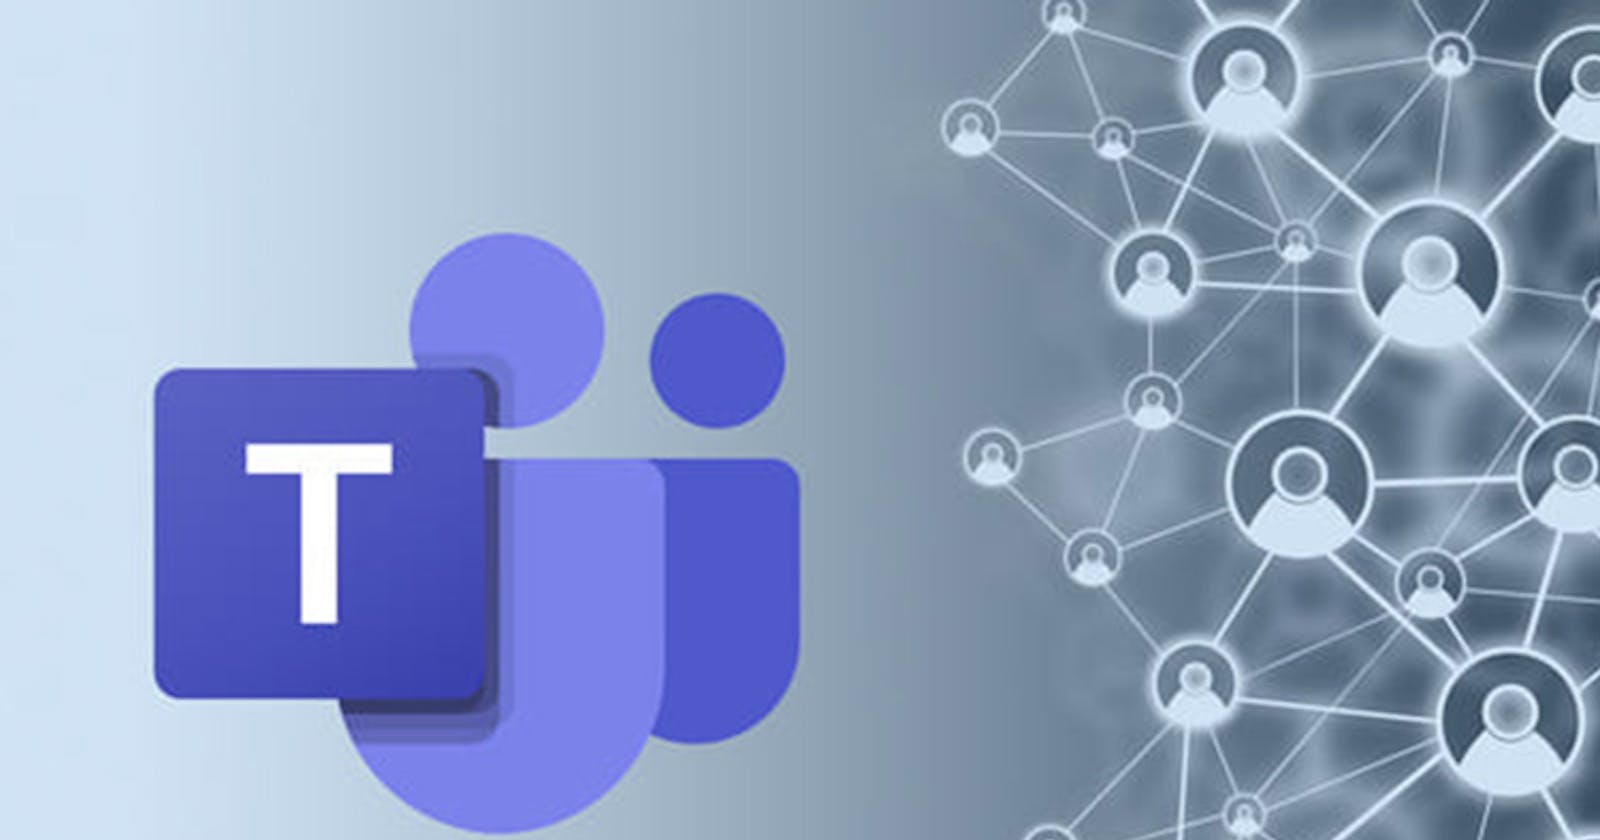 Get started with Microsoft Teams: A complete walk-through